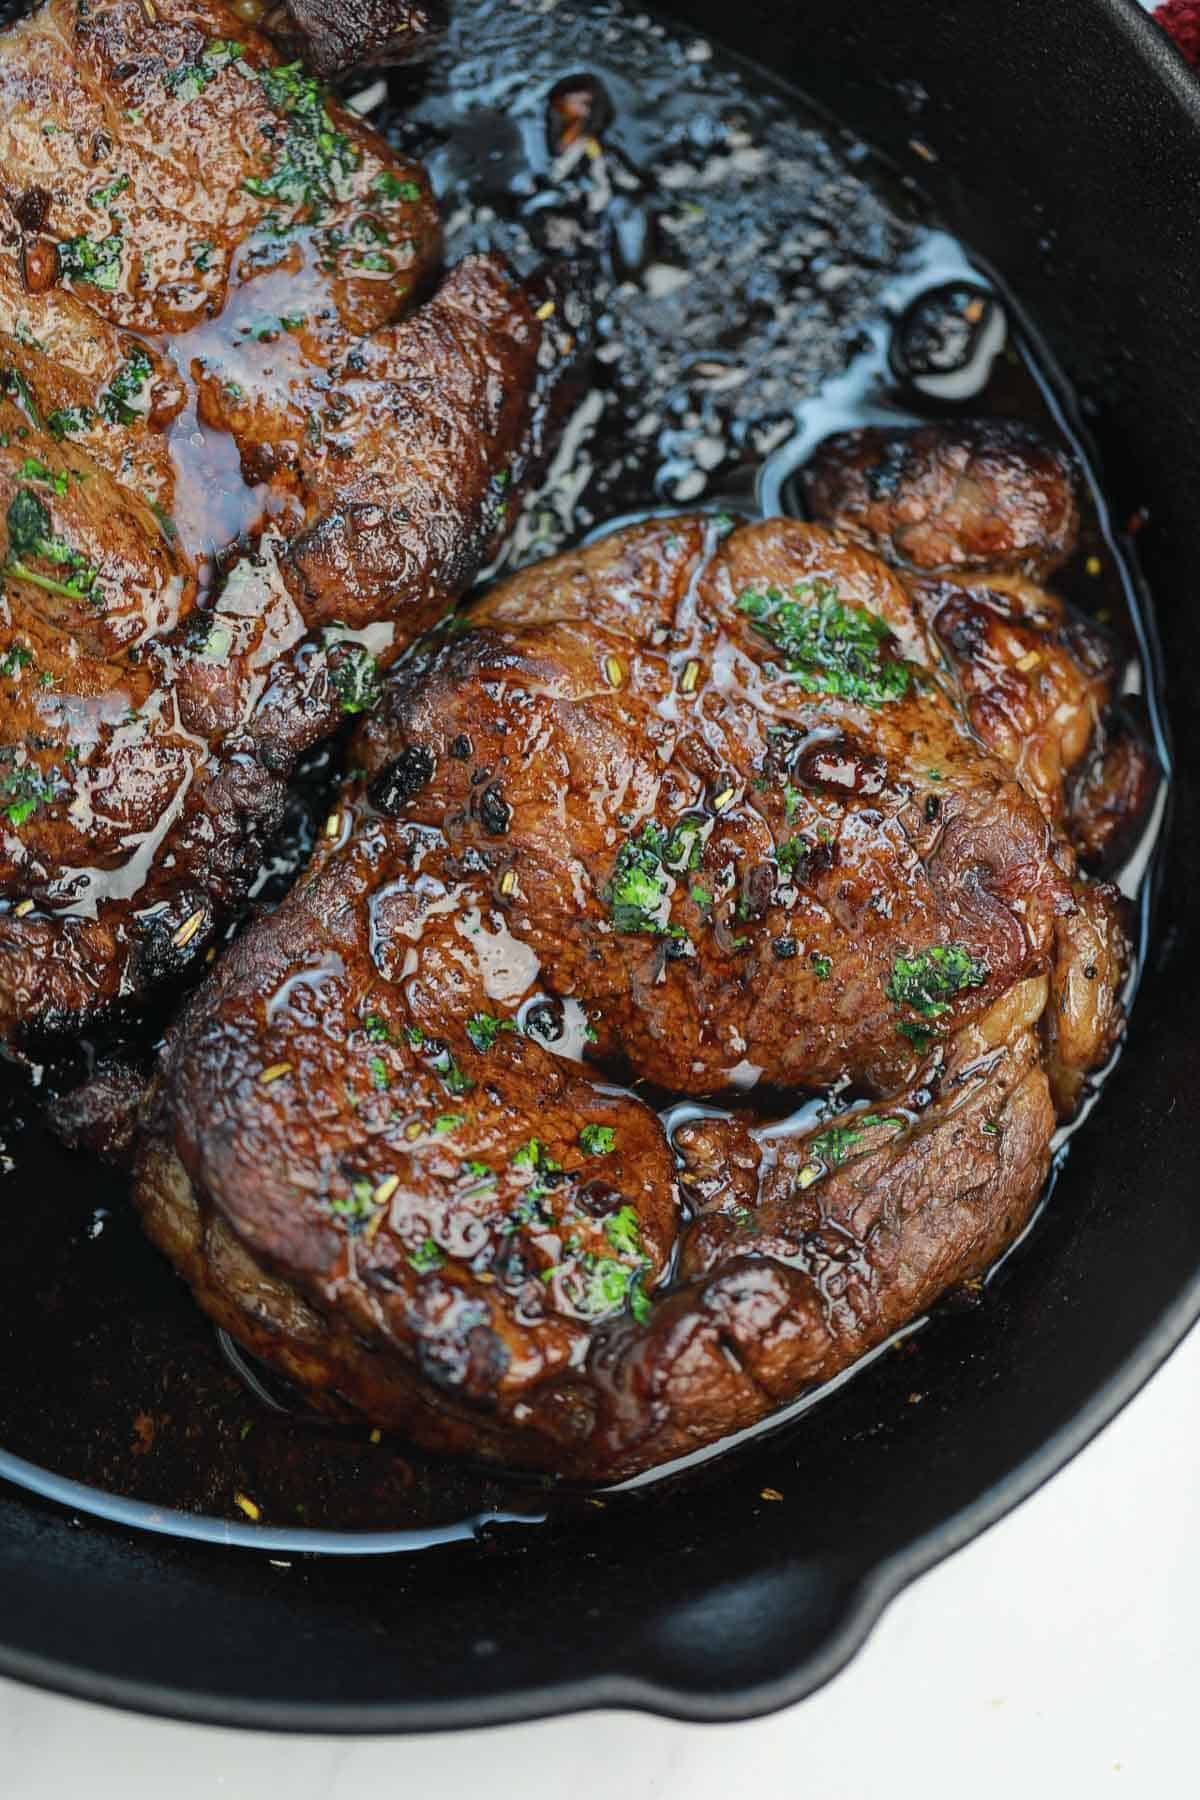 cooked steak in a skillet picture for what goes well with steak (steak side dishes) post.